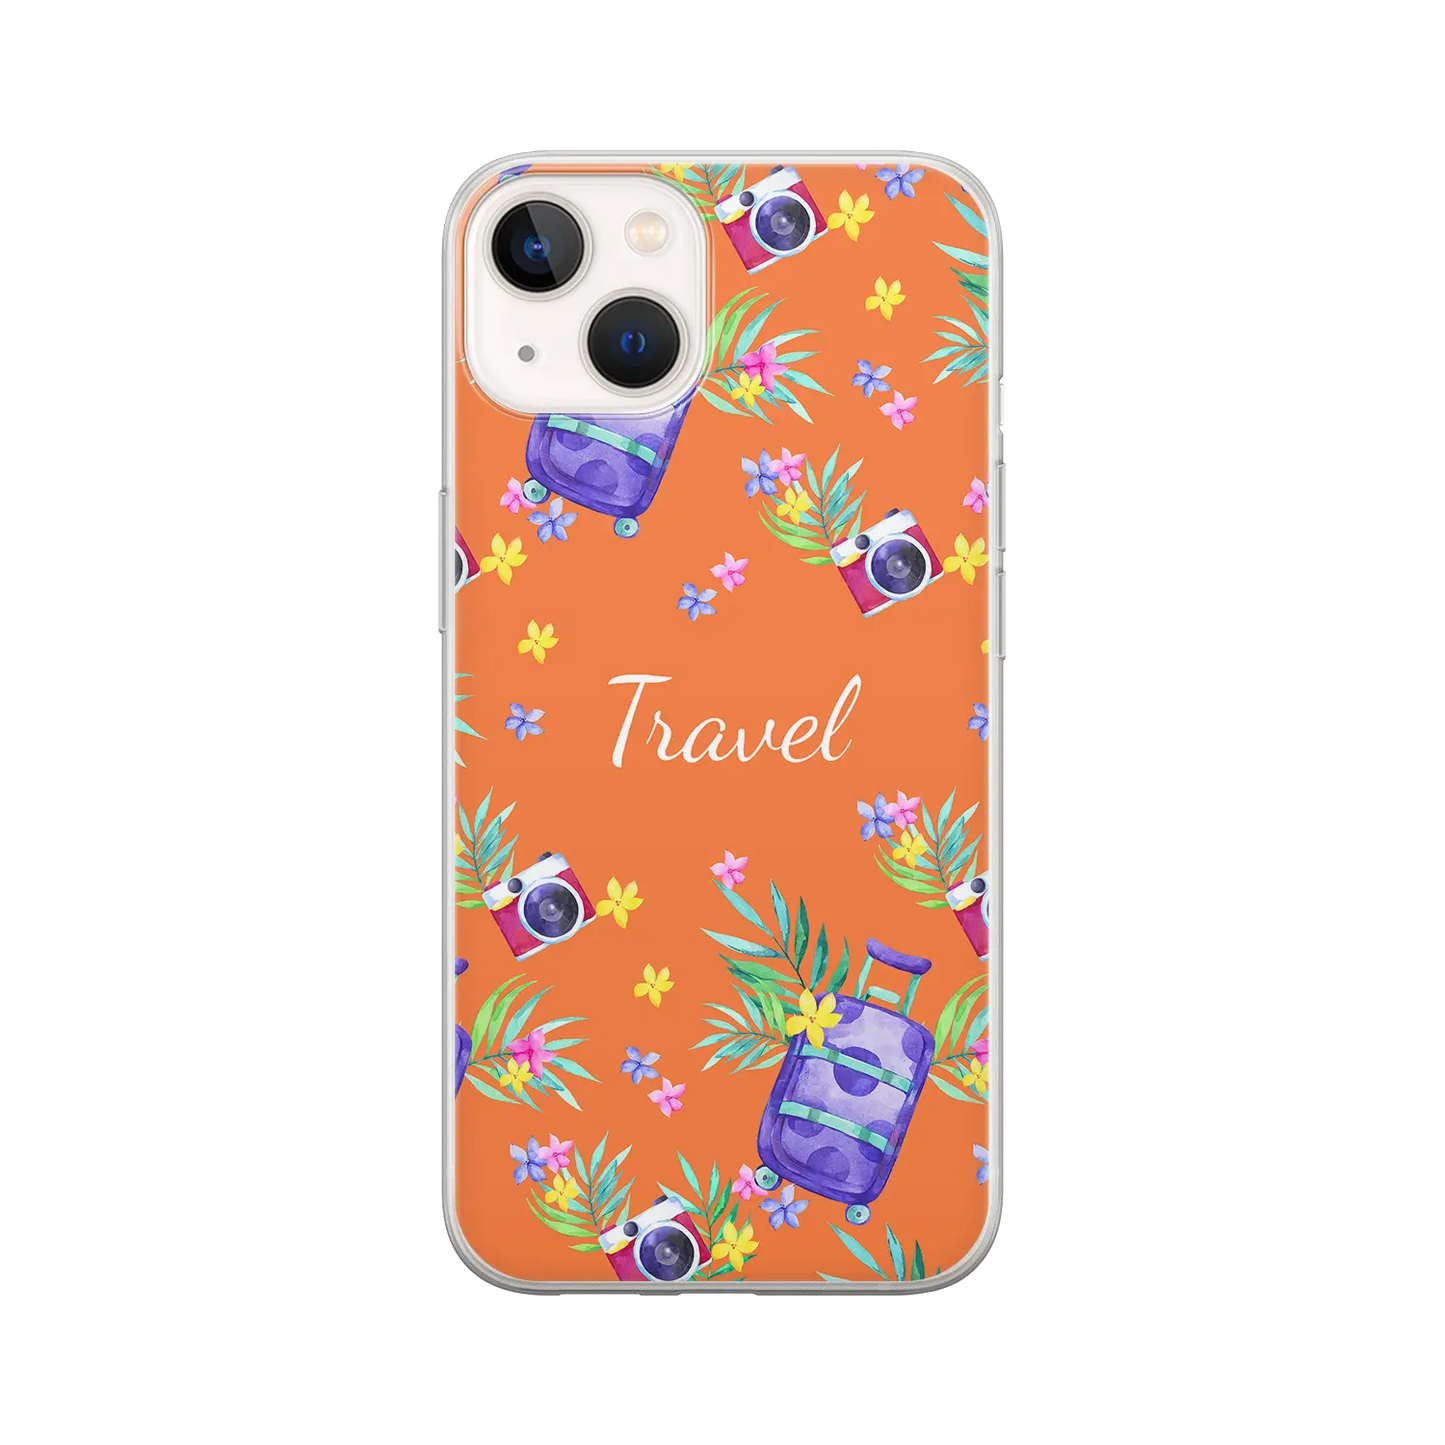 Suitcase Ready - Personalised iPhone Case